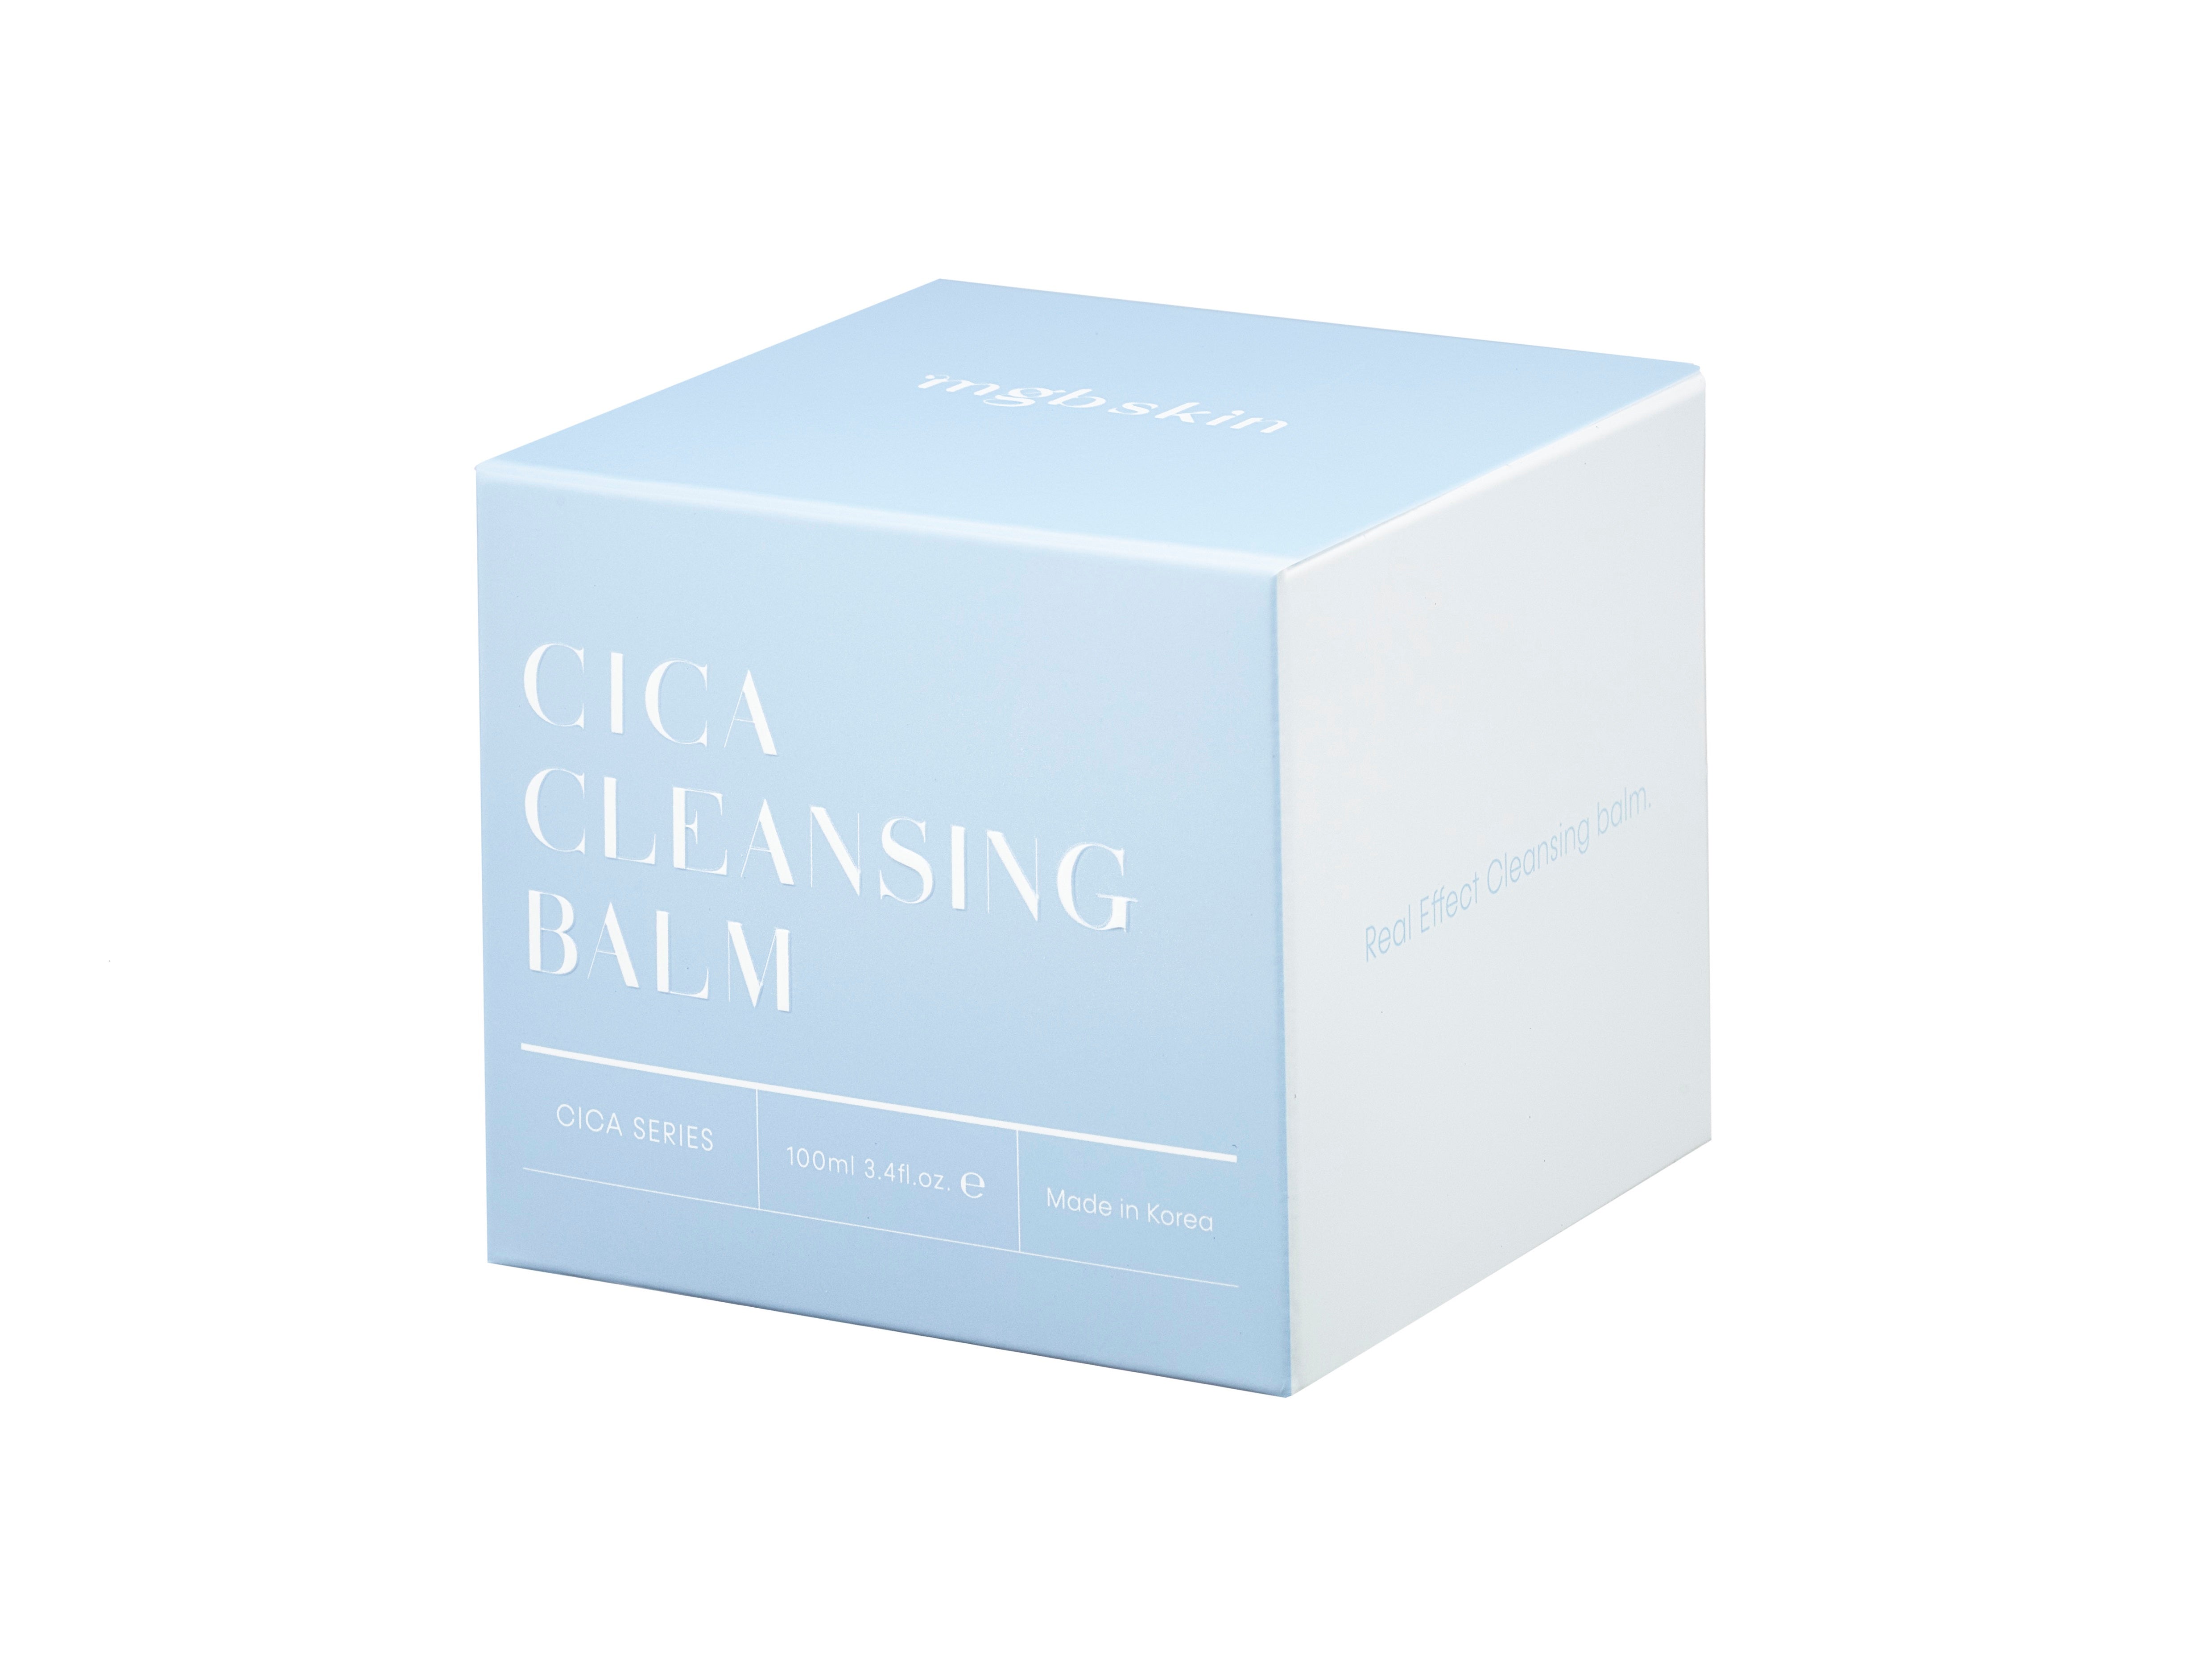 CICA CLEANSING BALM